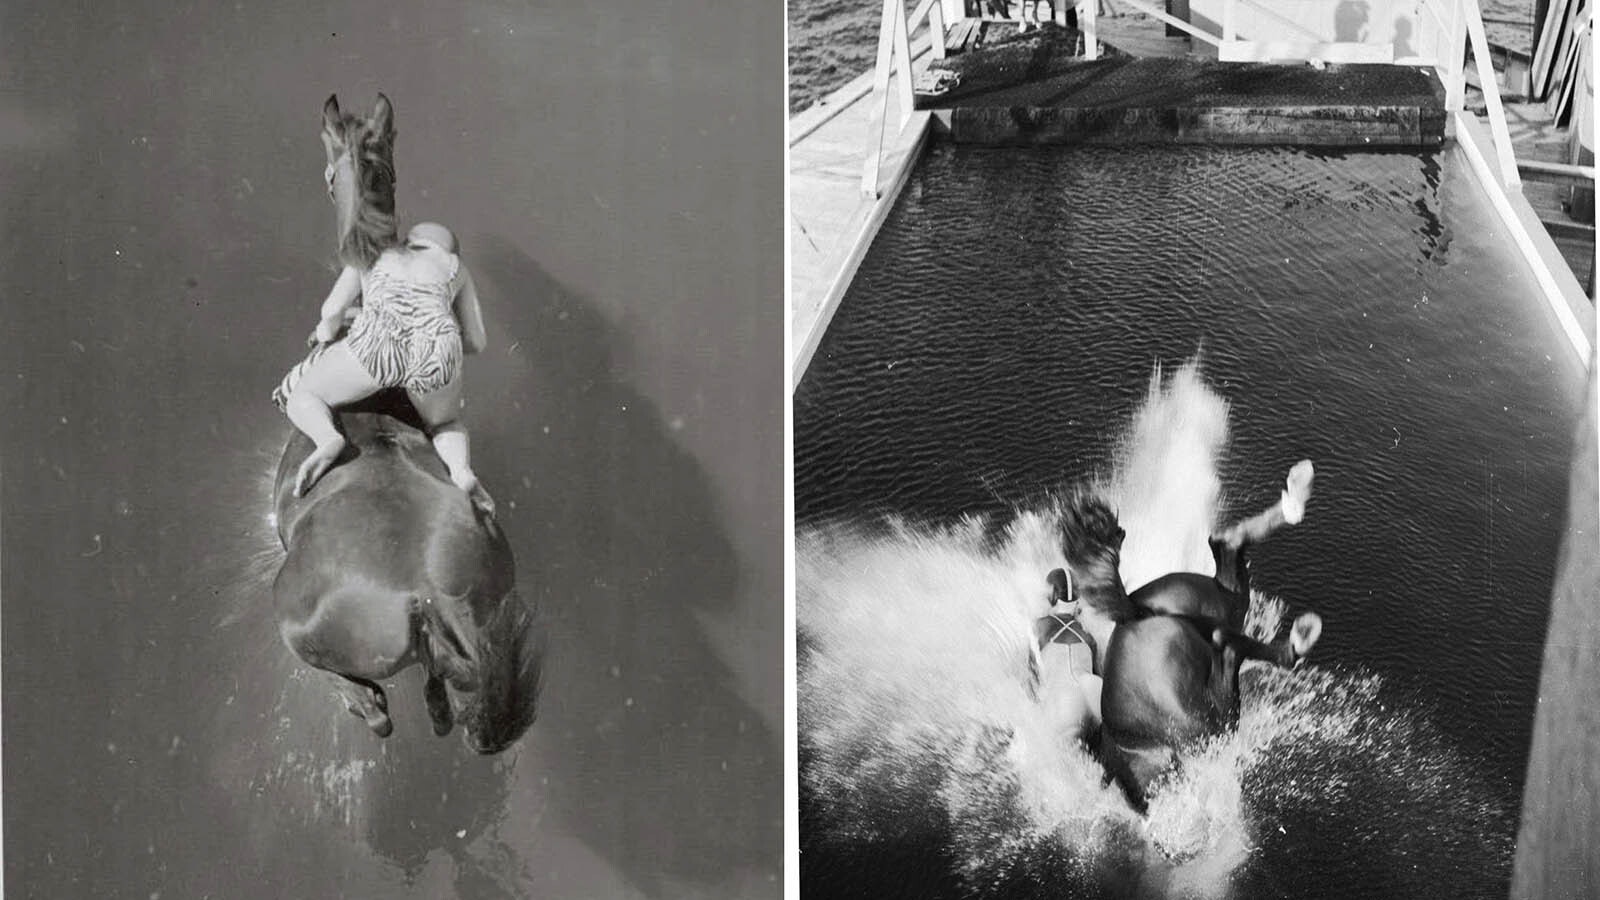 Landing was the hard part. At right, Dimah and her rider Ann Eastham plunge into the pool in 1960.